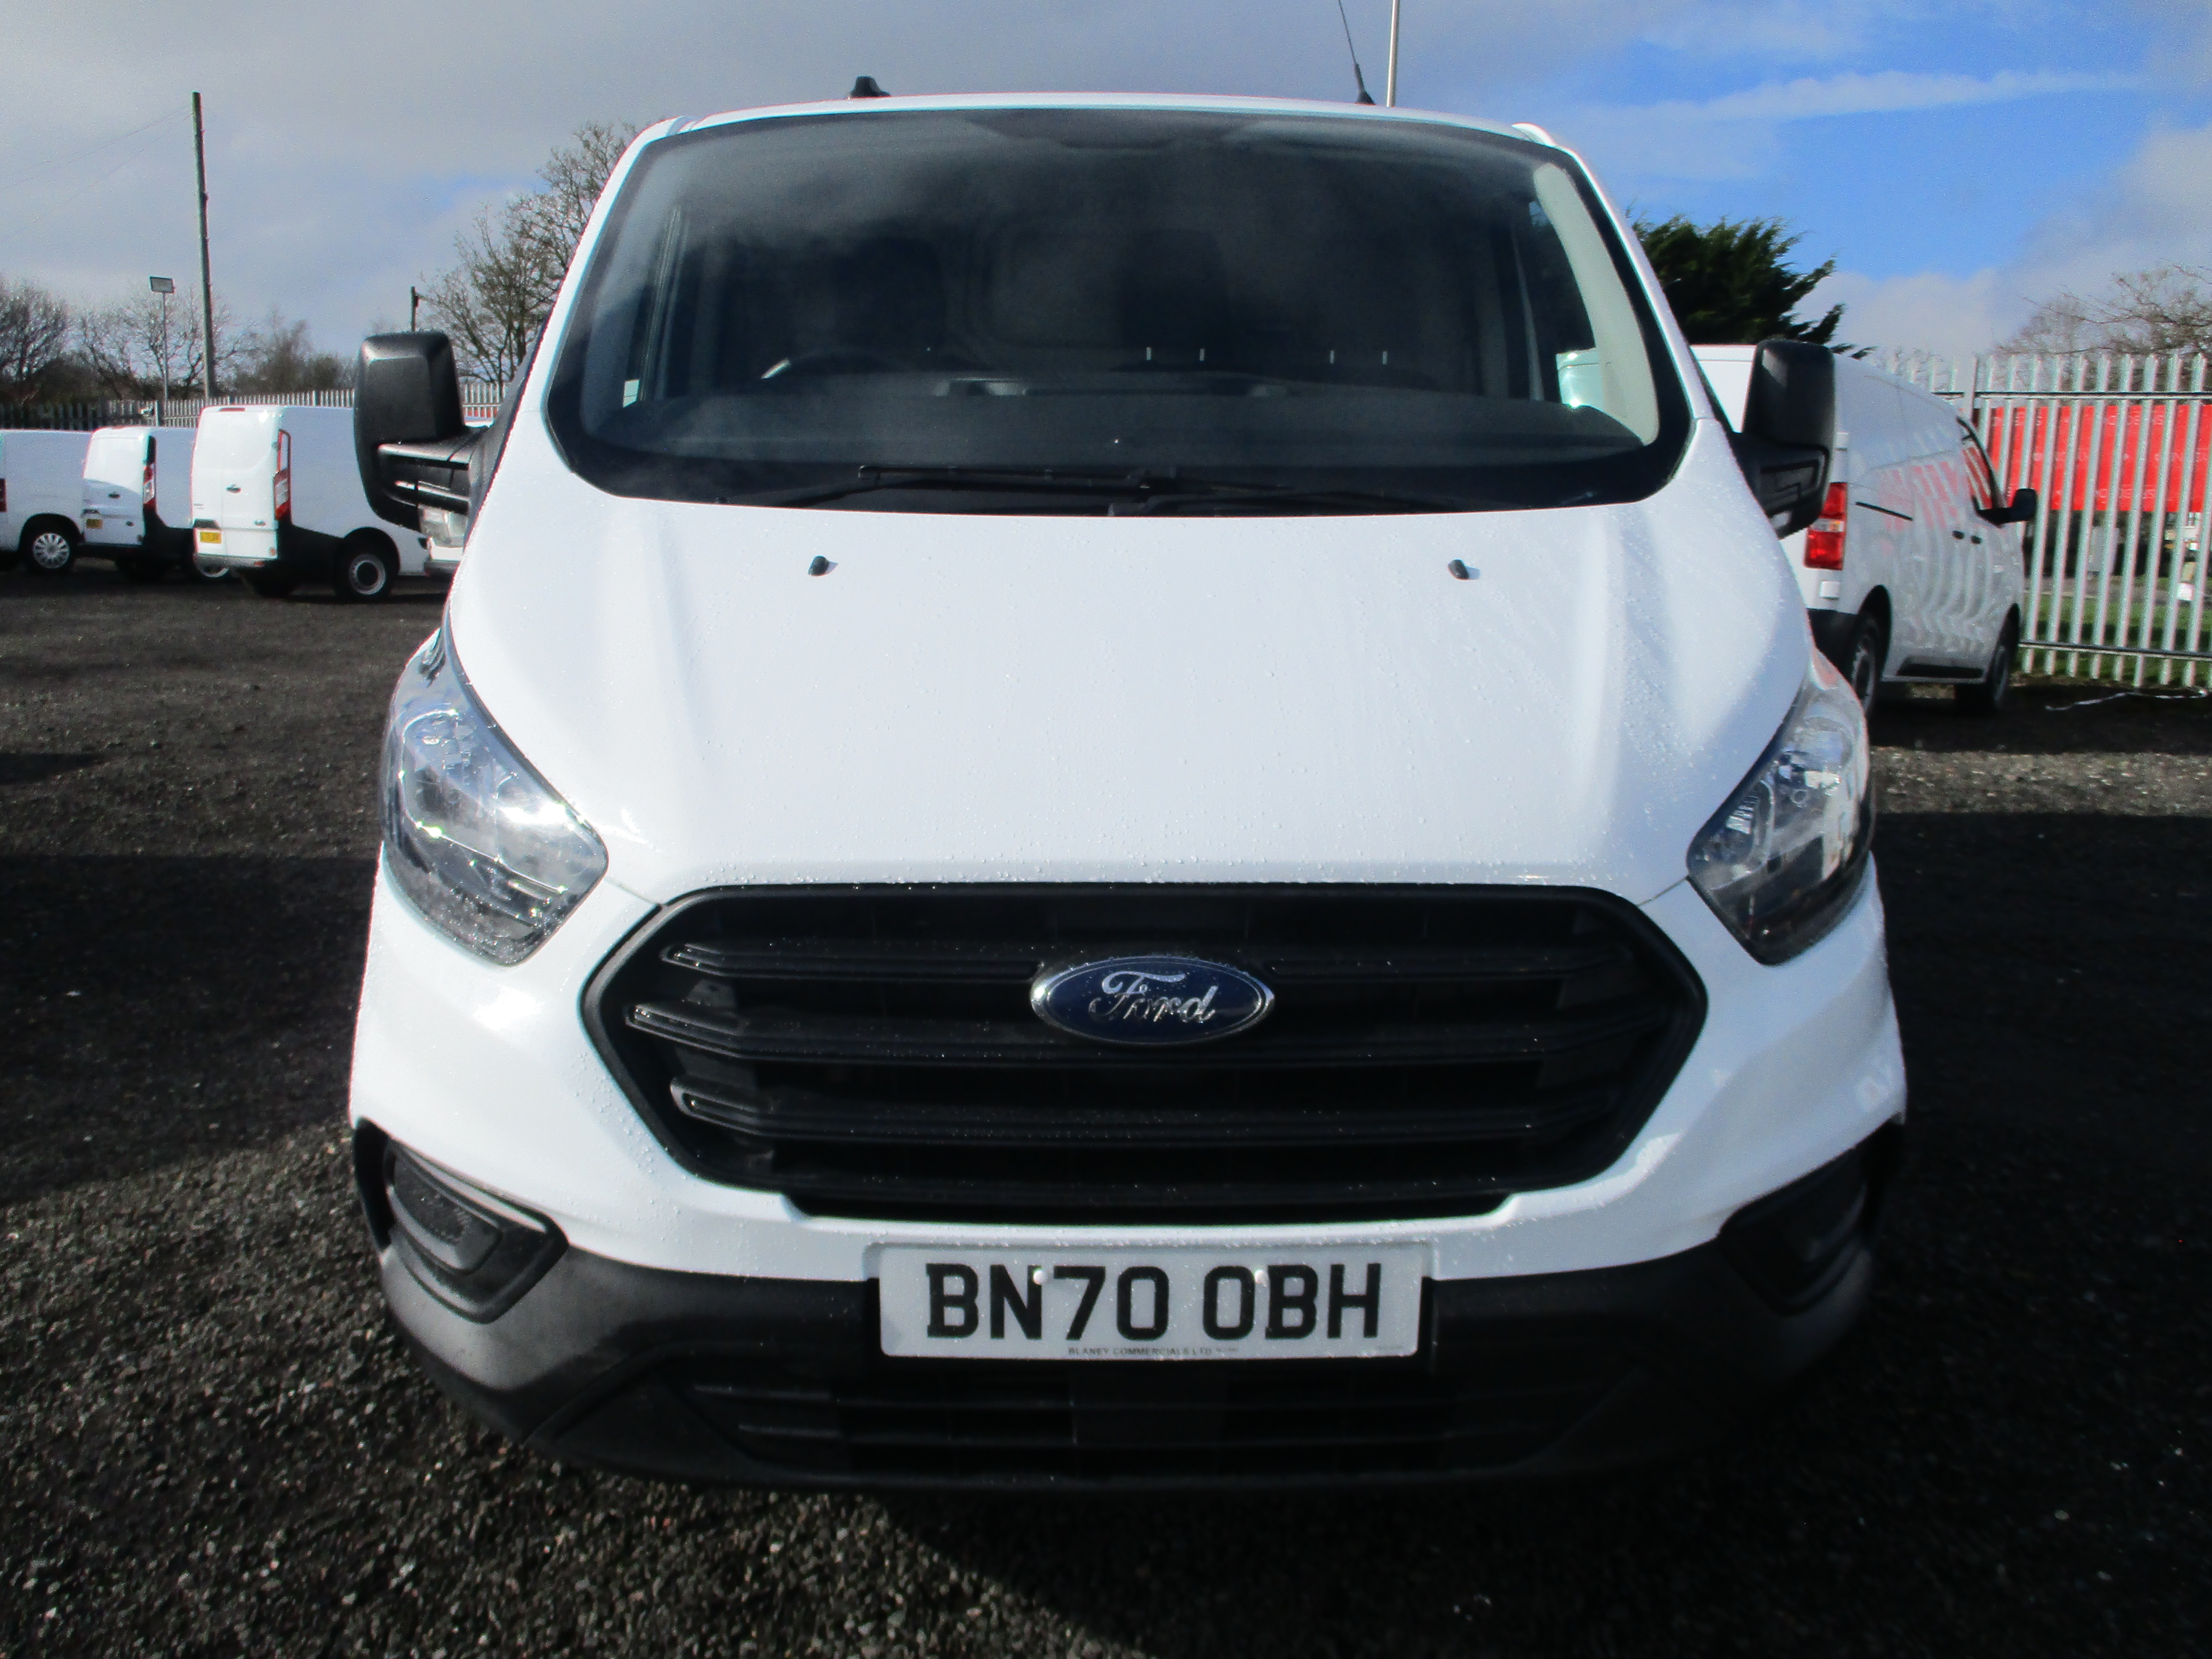 Ford Custom 300 L1H1 2.0 EcoBlue 105PS Leader Panel Van with AIR CON ( One Owner From New ) £1,000 OFF